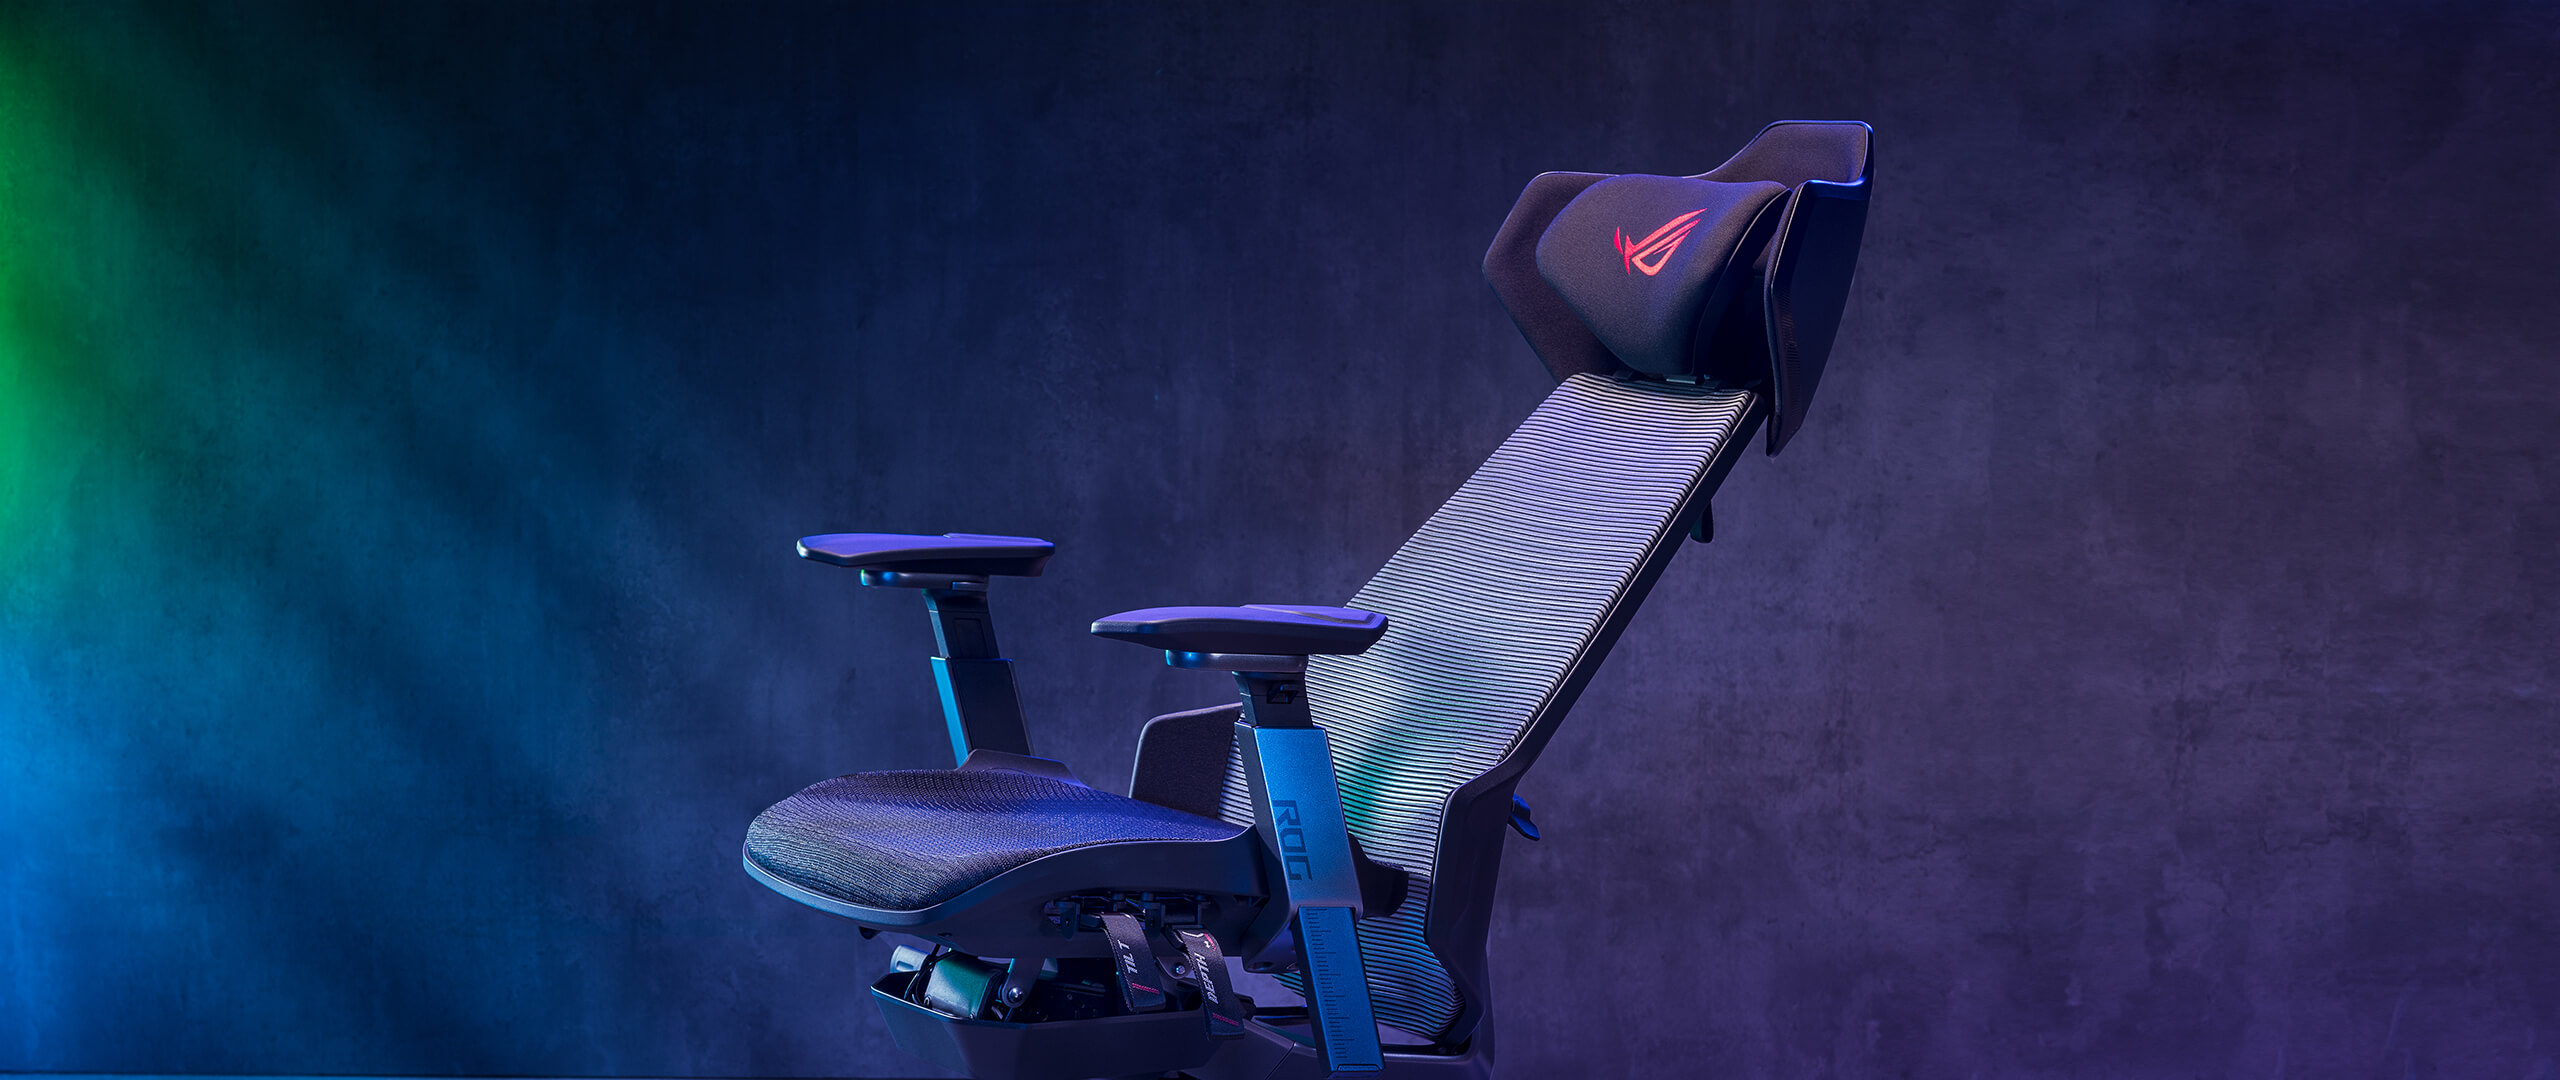 ROG Destrier Ergo Gaming Chair side view with backrest reclined at an angle